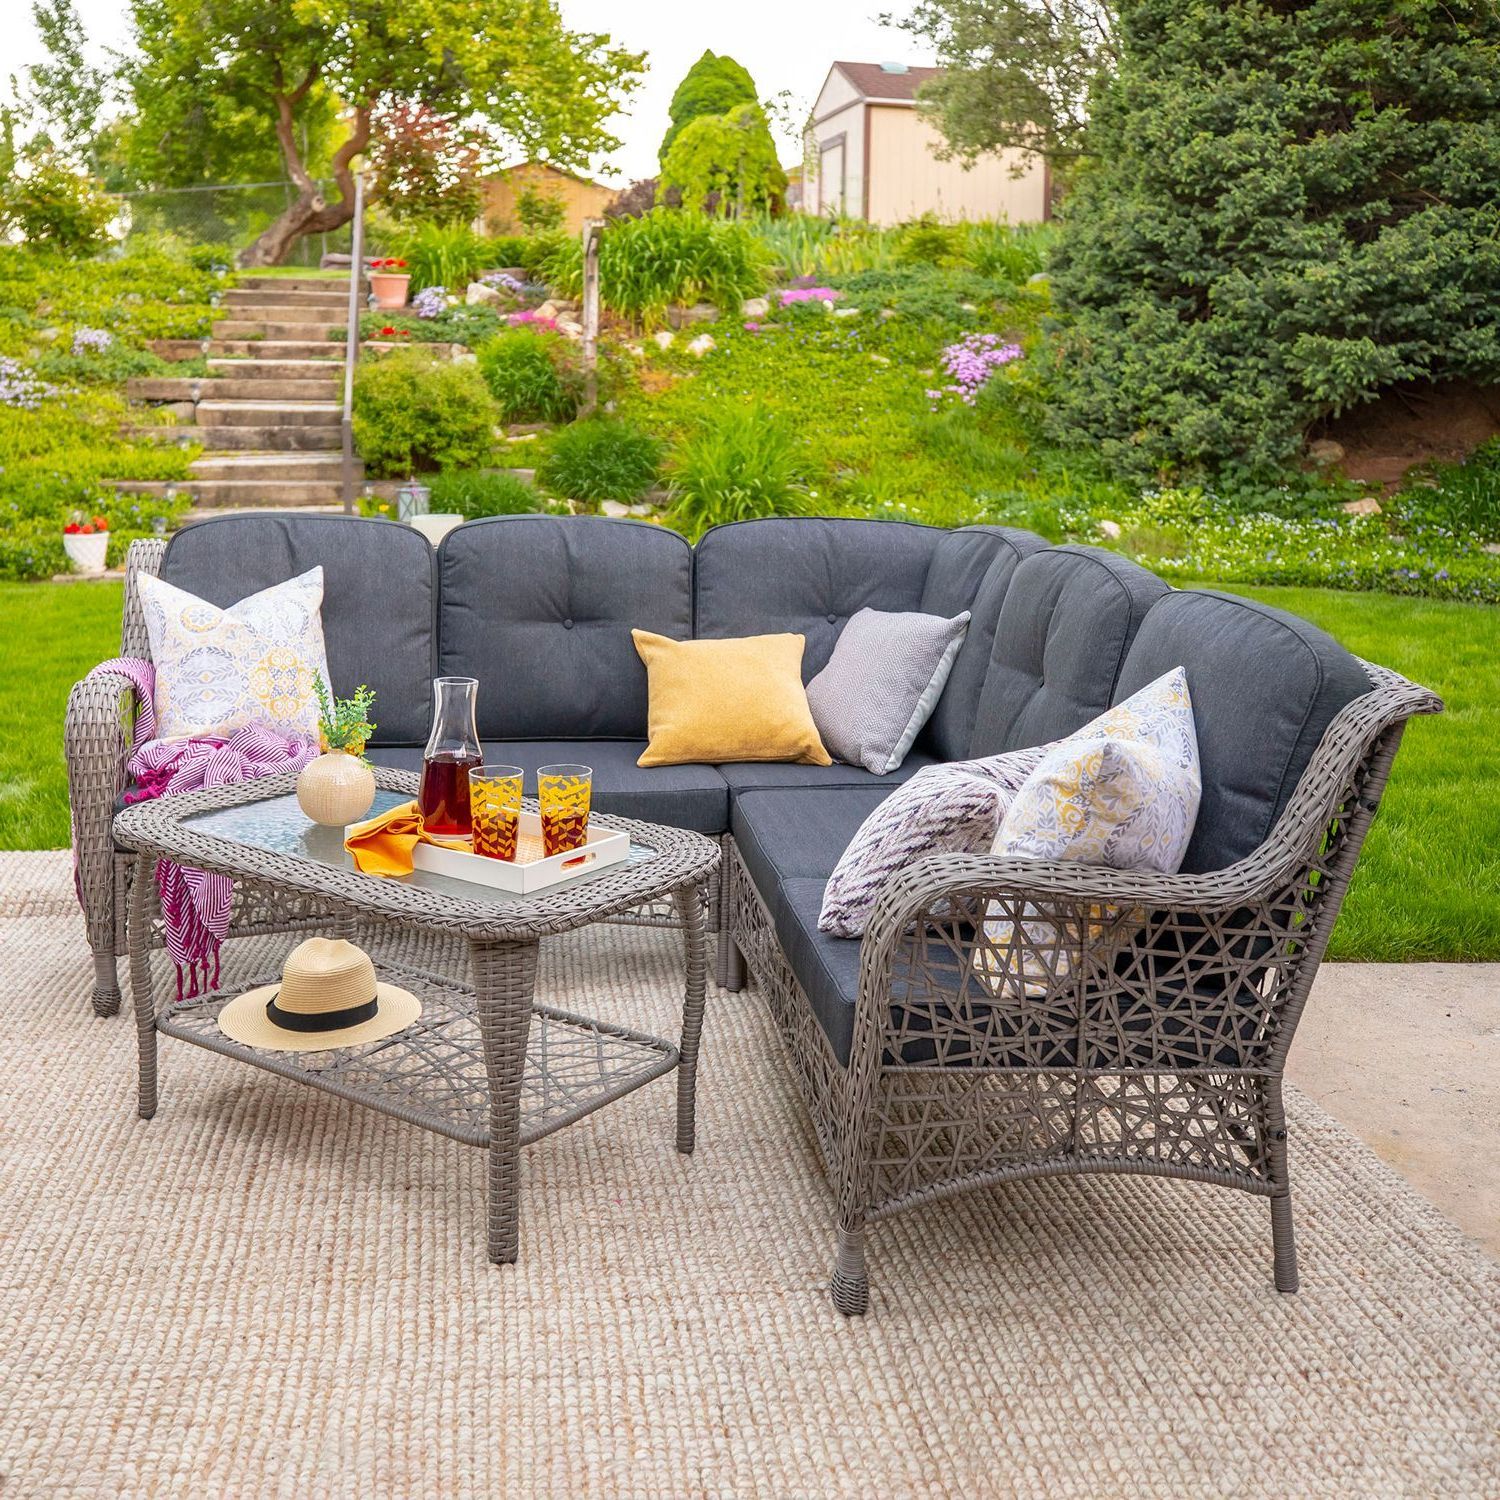 Outdoor Wicker Gray Cushion Patio Sets Intended For Favorite Outdoor Gray Rattan Sectional With Cushions & Table Set (View 7 of 15)